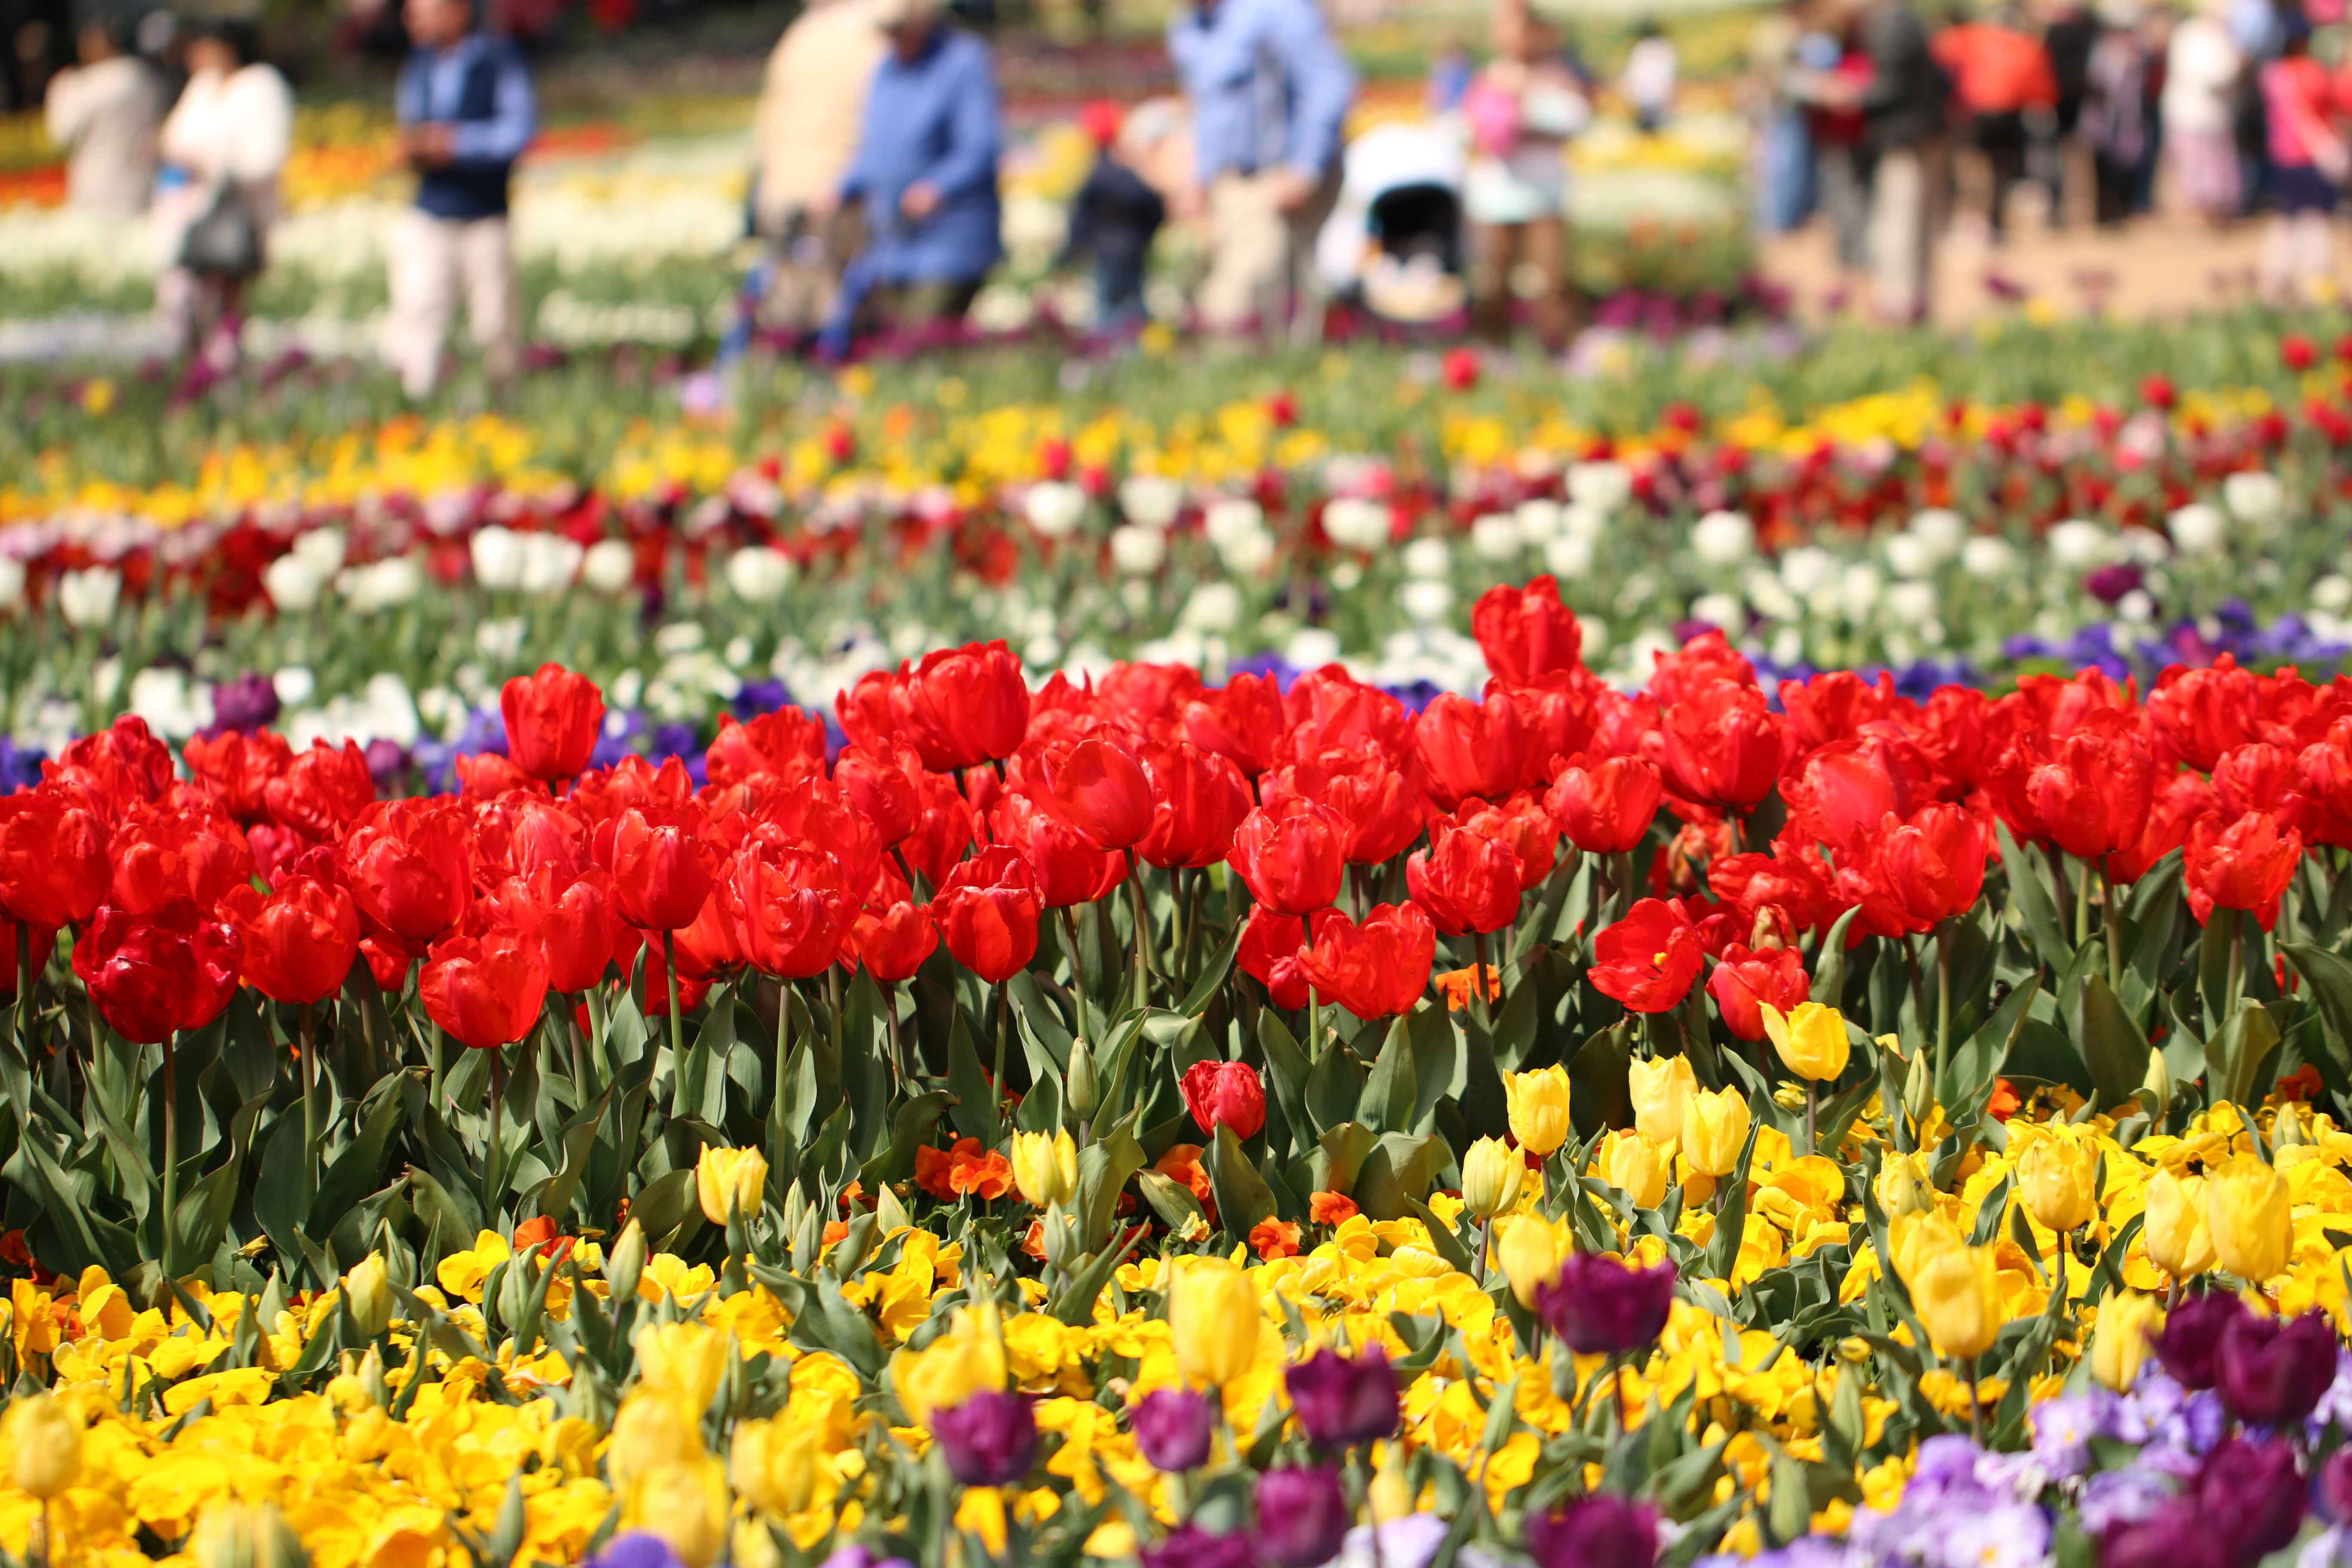 Photo Essay: Floriade Night and Day | Photo essay and Flowers